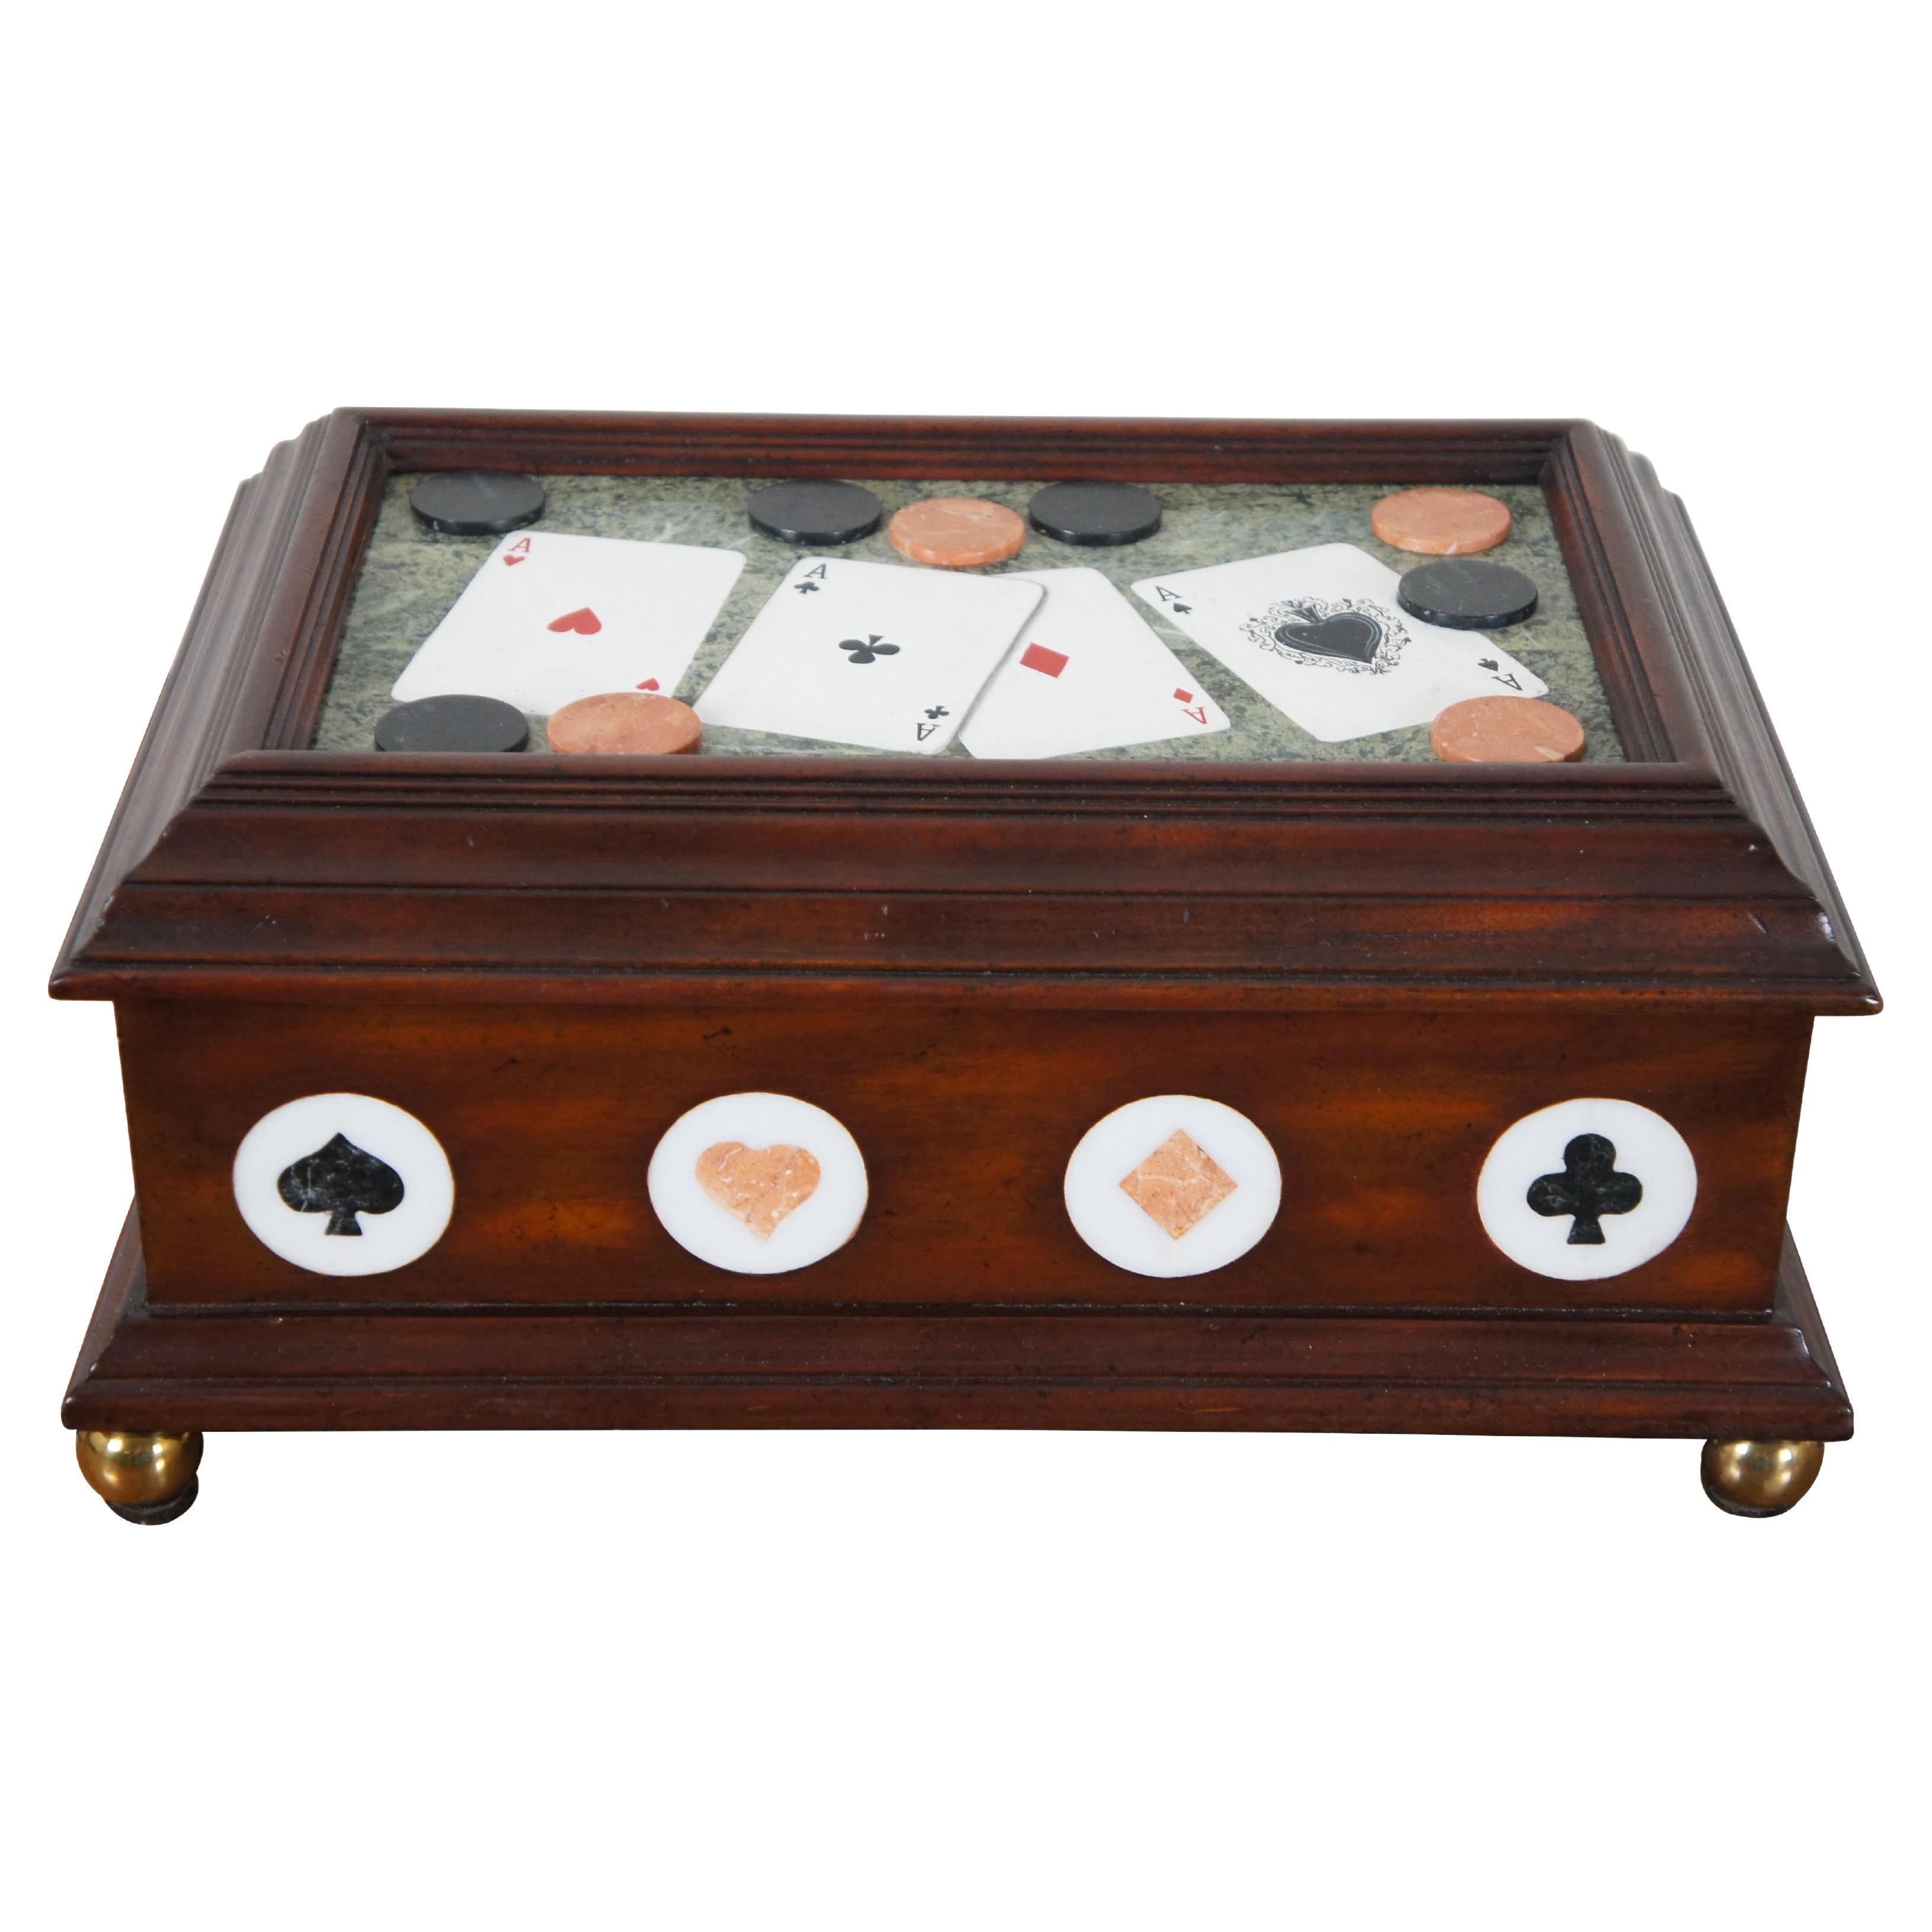 Maitland Smith Inlaid Aces High 4 of a Kind Stone Poker Game Keepsake Box 15" For Sale